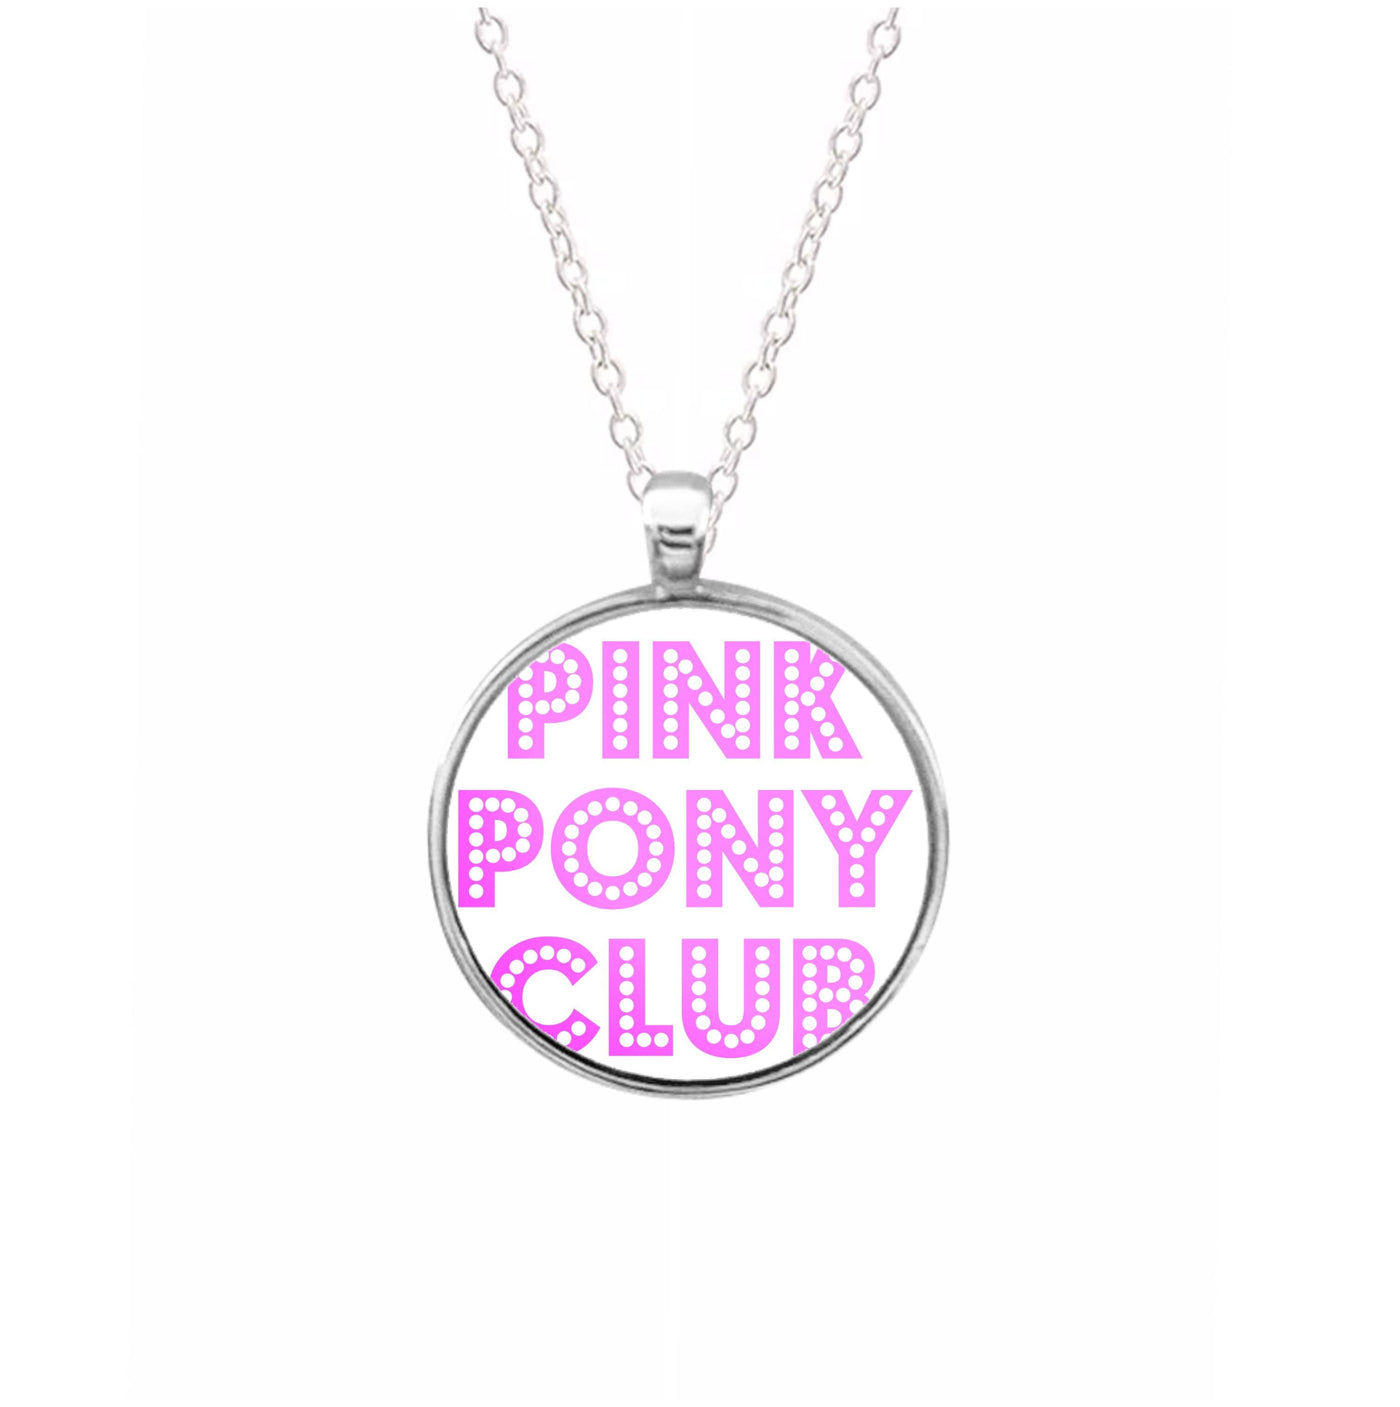 Pink Pony Club - Chappell Roan Necklace